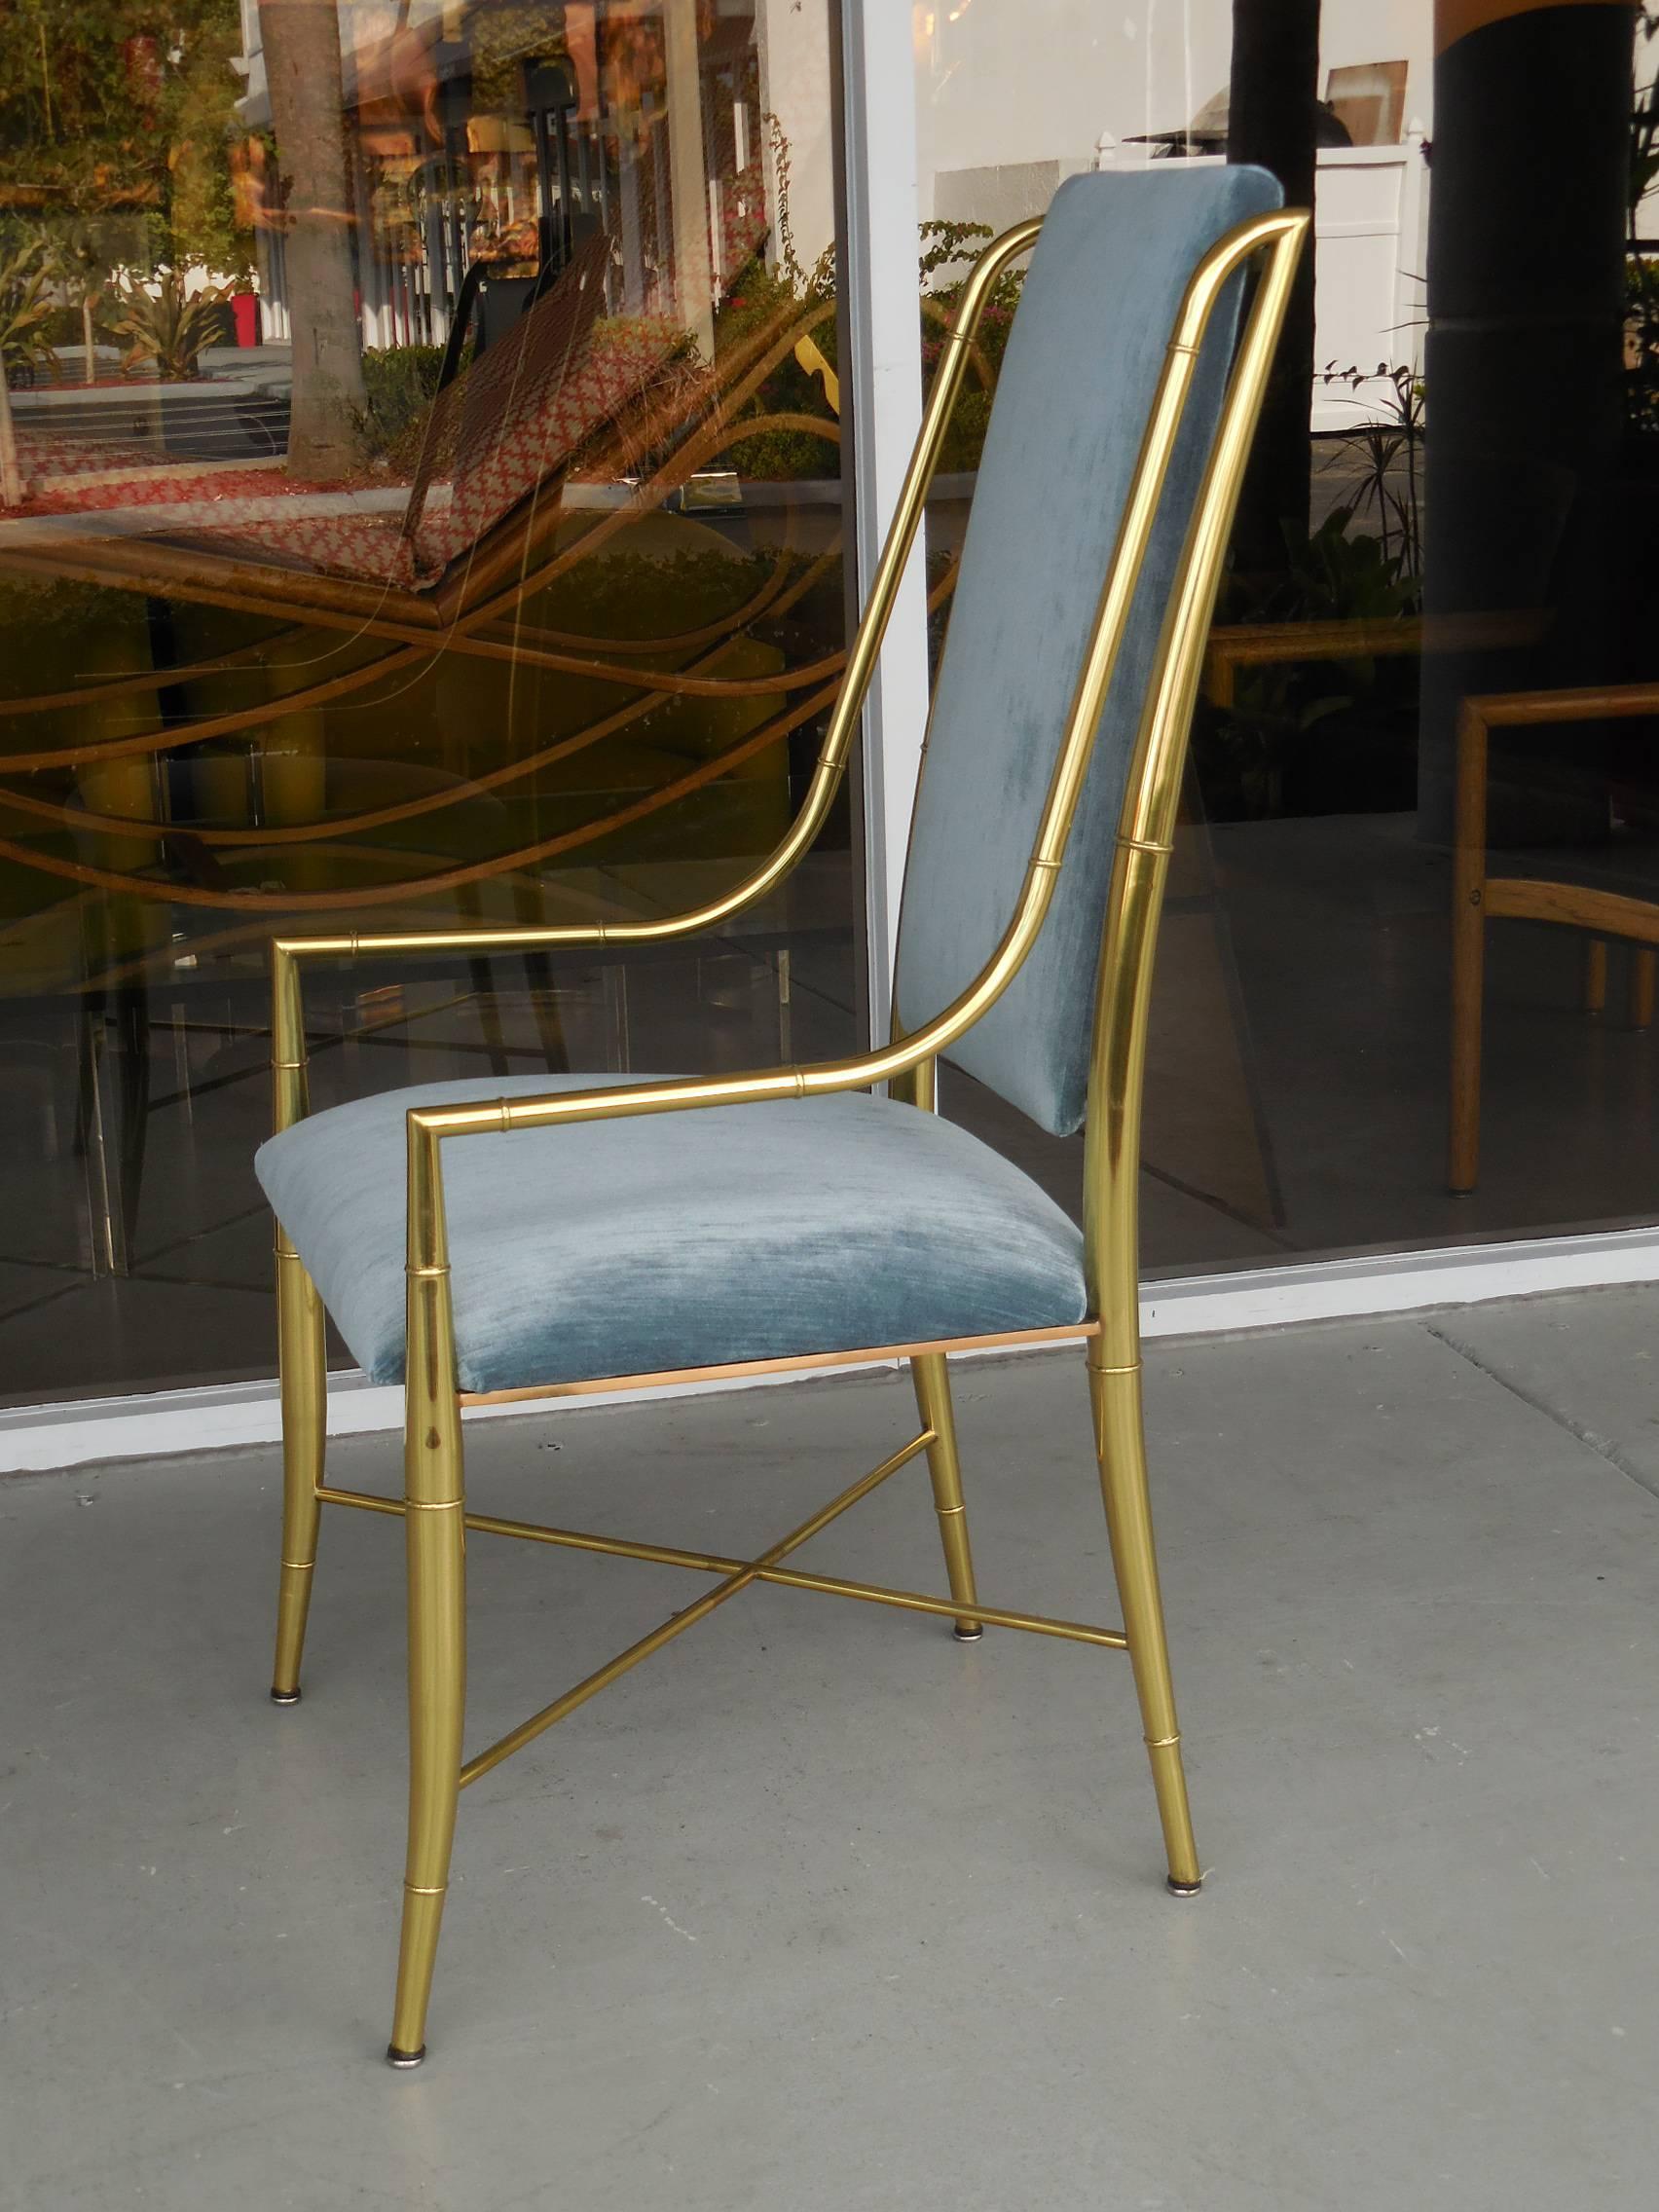 Very fluid lines and elegant proportions. A set of eight chairs. Polished brass frames and upholstered seat and back.